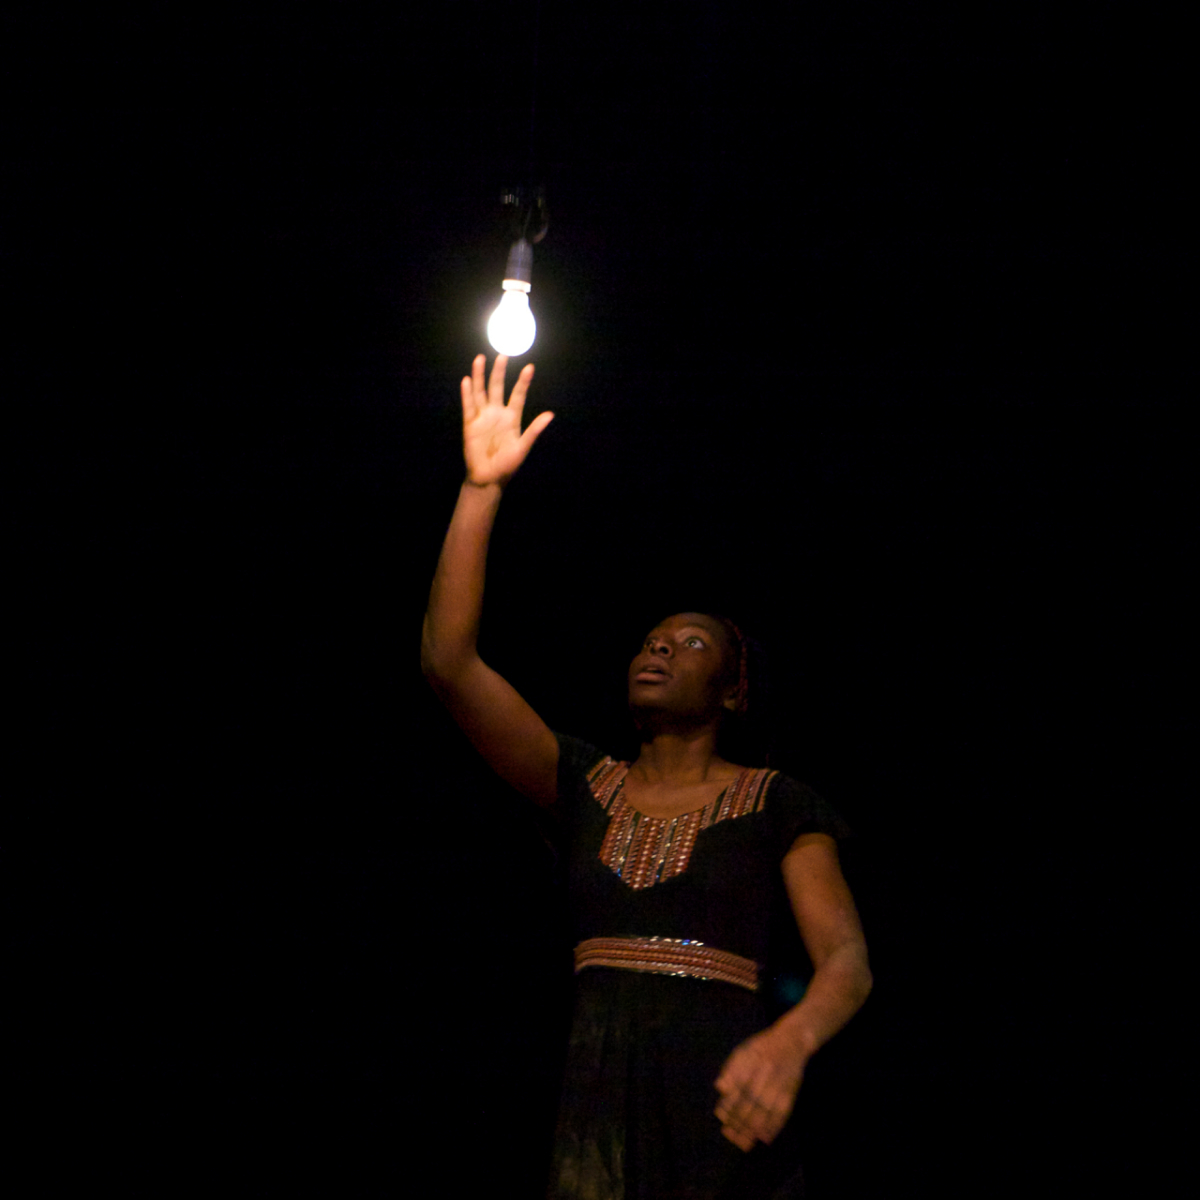 A performer is reaching up for a light bulb hanging on the ceiling. The performer looks surprised or mesmerised.